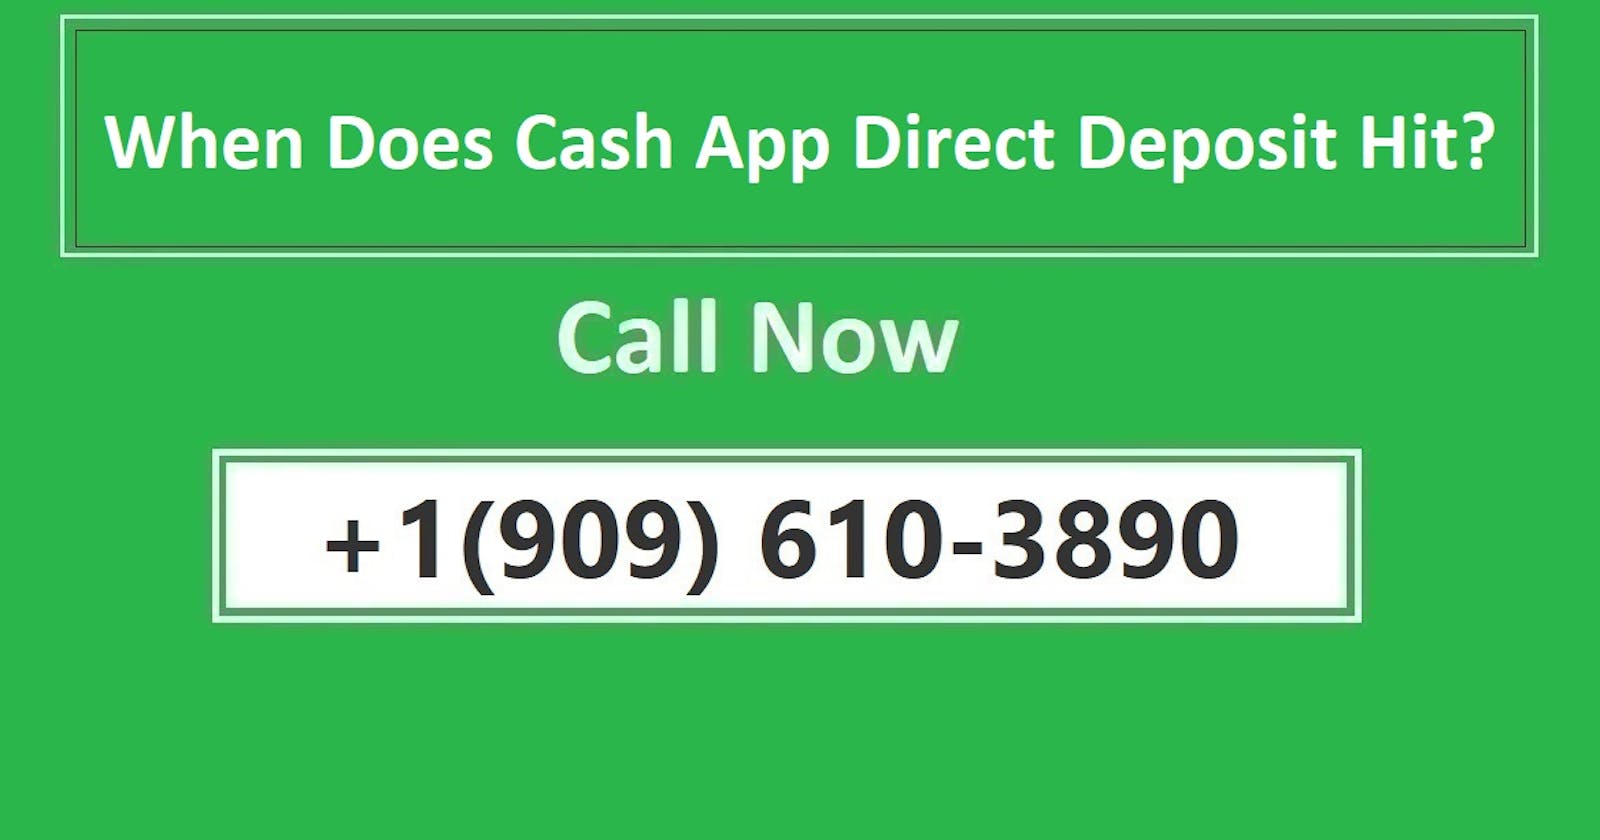 When Does Cash App Direct Deposit Hit? How to Enable Direct Deposit?